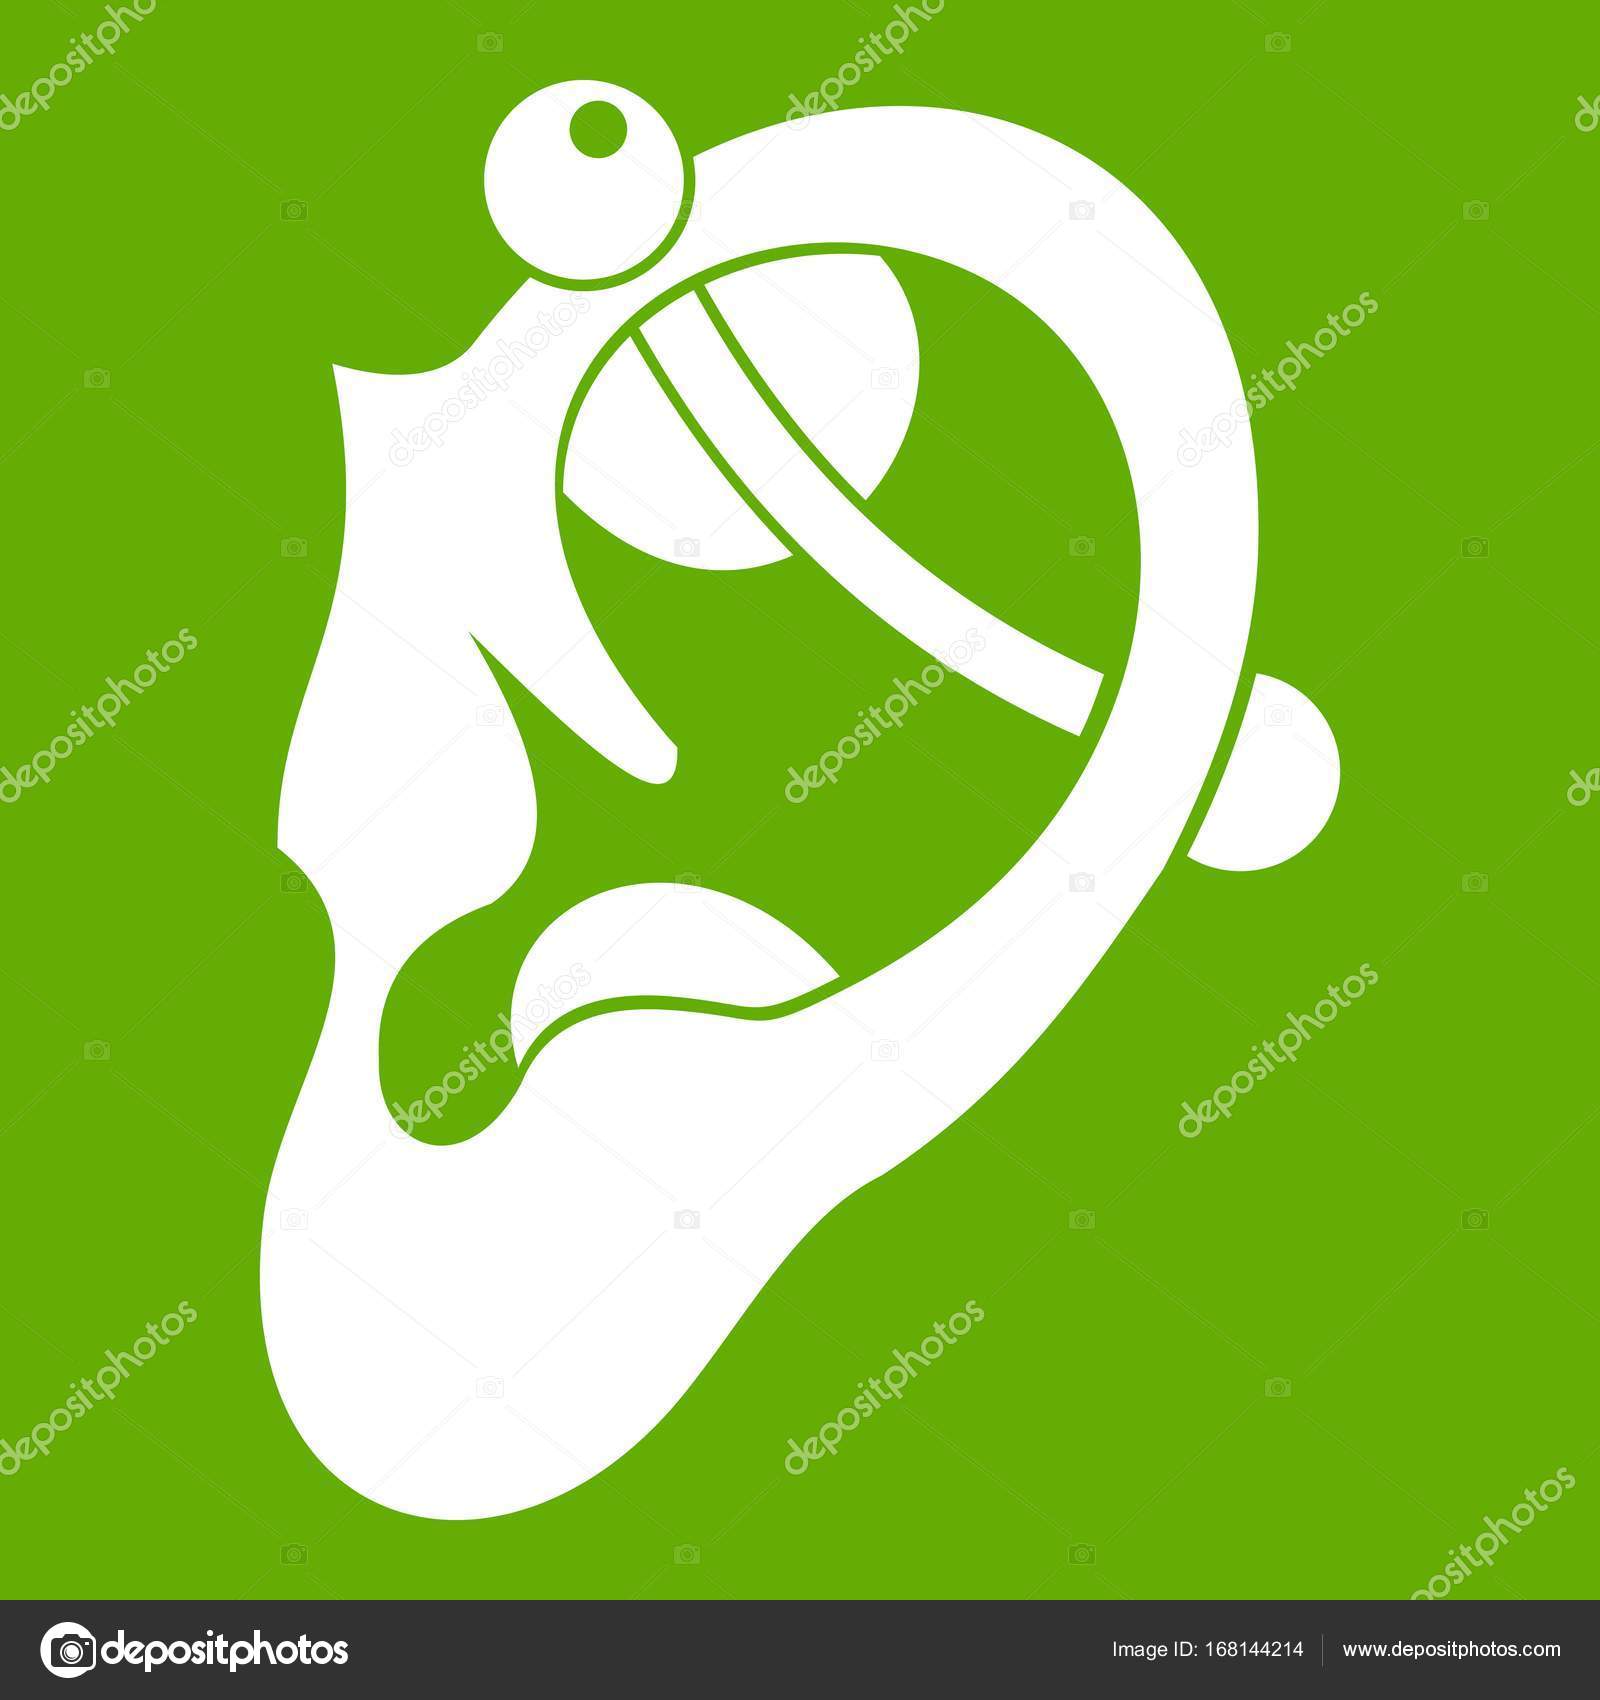 Human Nose With Piercing Icon Stock Vector Art  More Images of 